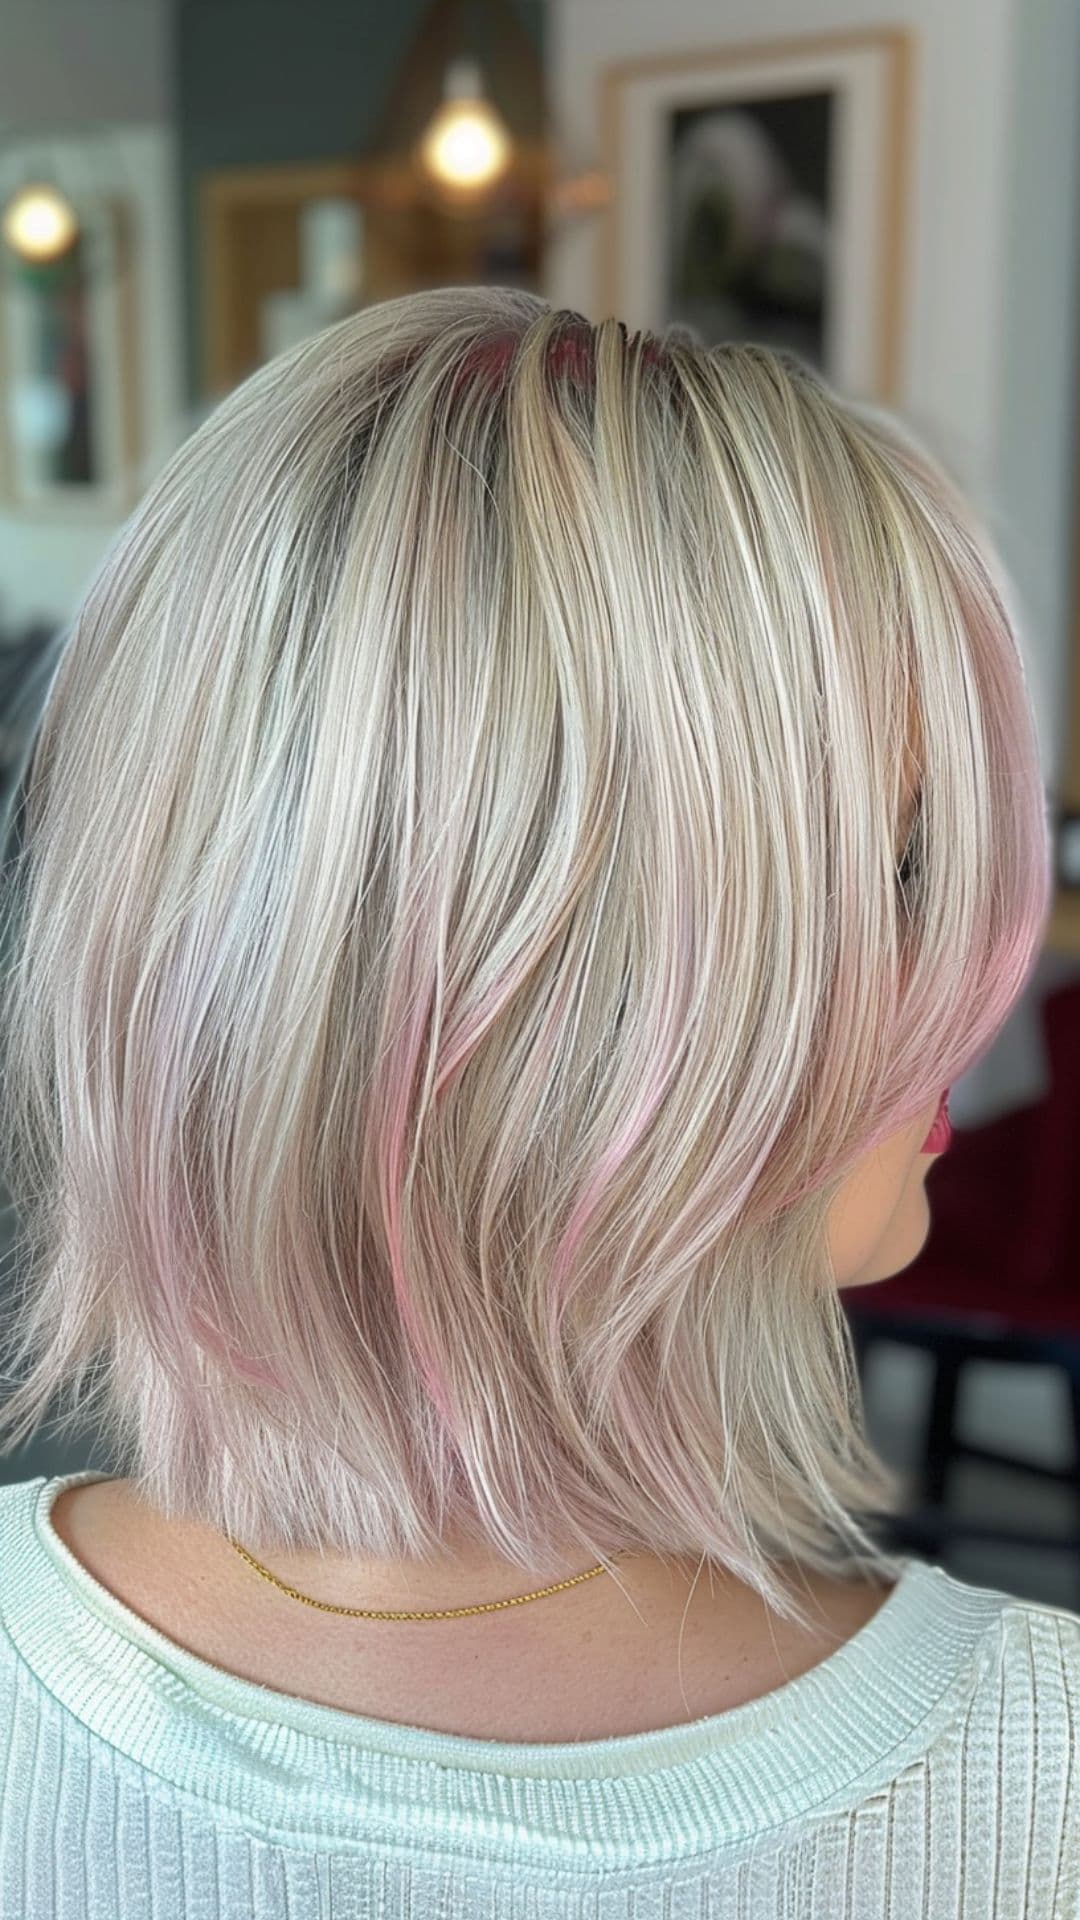 A woman modelling a blonde, silver, and pink highlights blend hair.